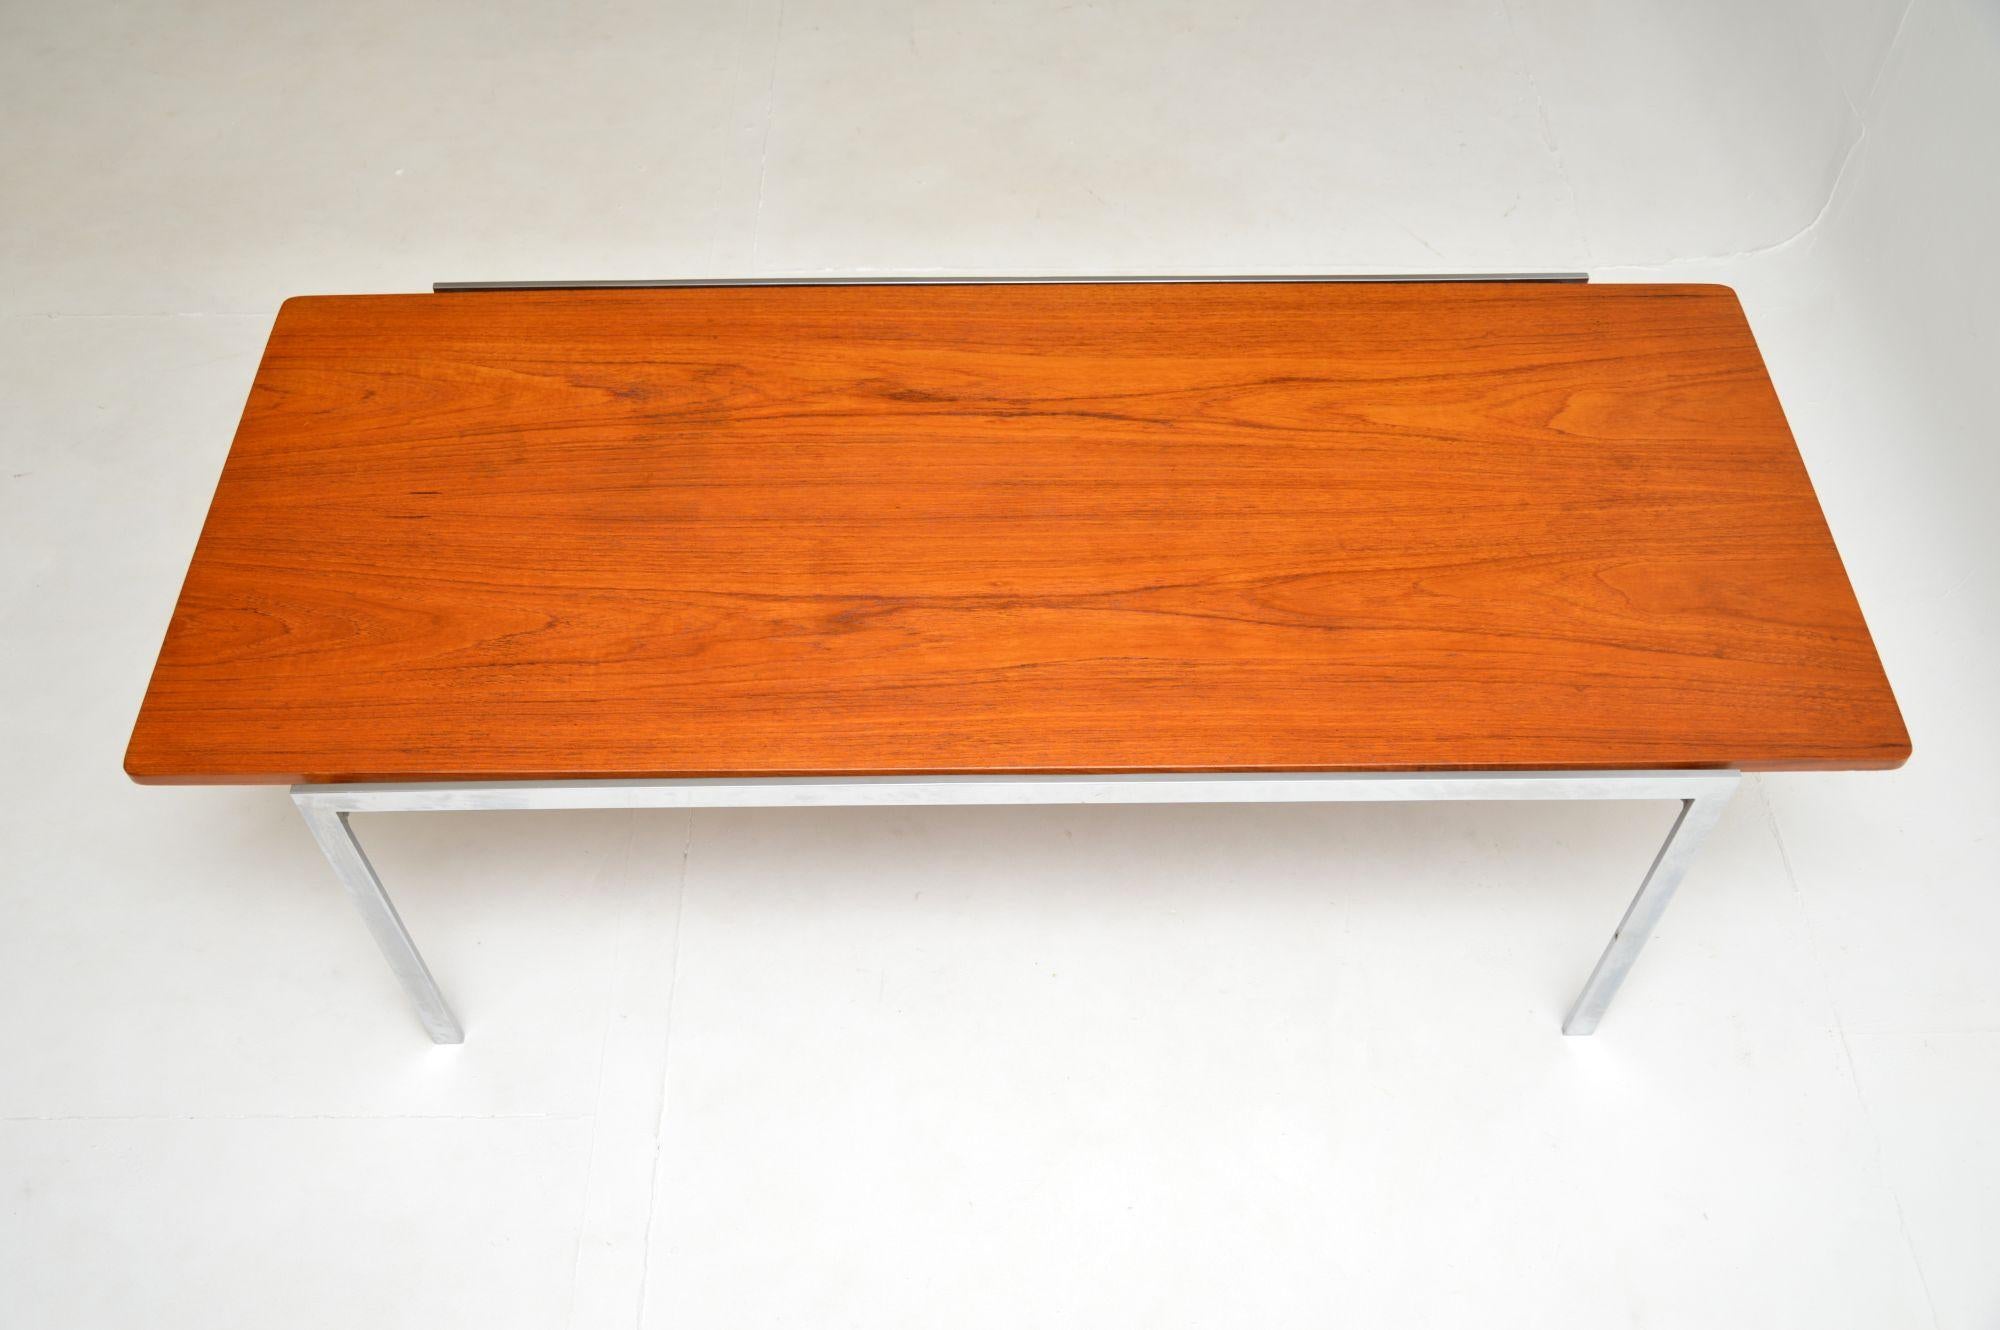 Mid-20th Century Danish Vintage Teak and Chrome Coffee Table by Arne Jacobsen For Sale